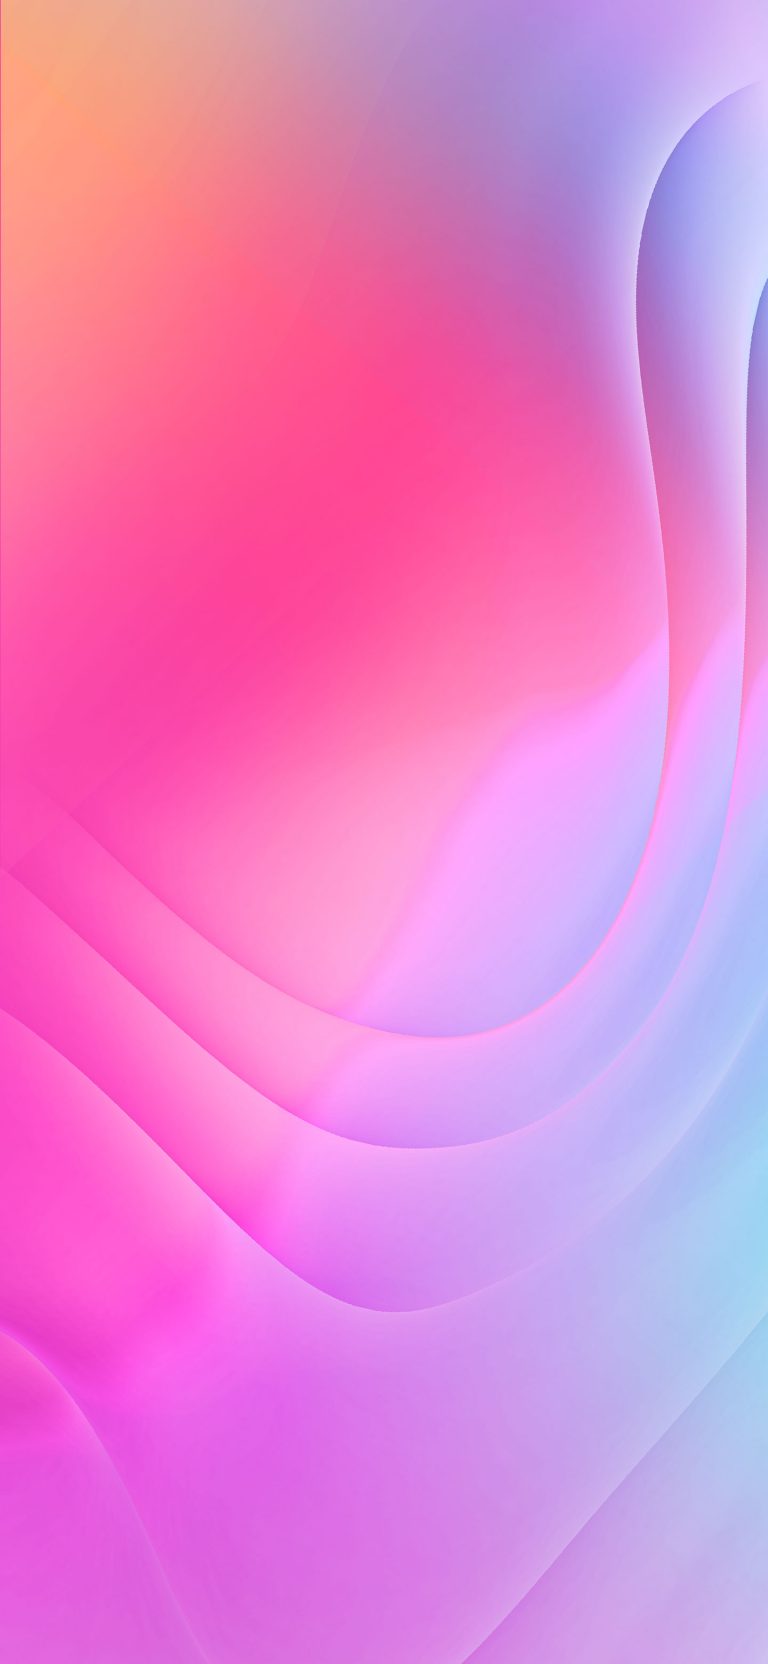 Download LG G7 Fit Wallpapers (QHD+) - DroidViews